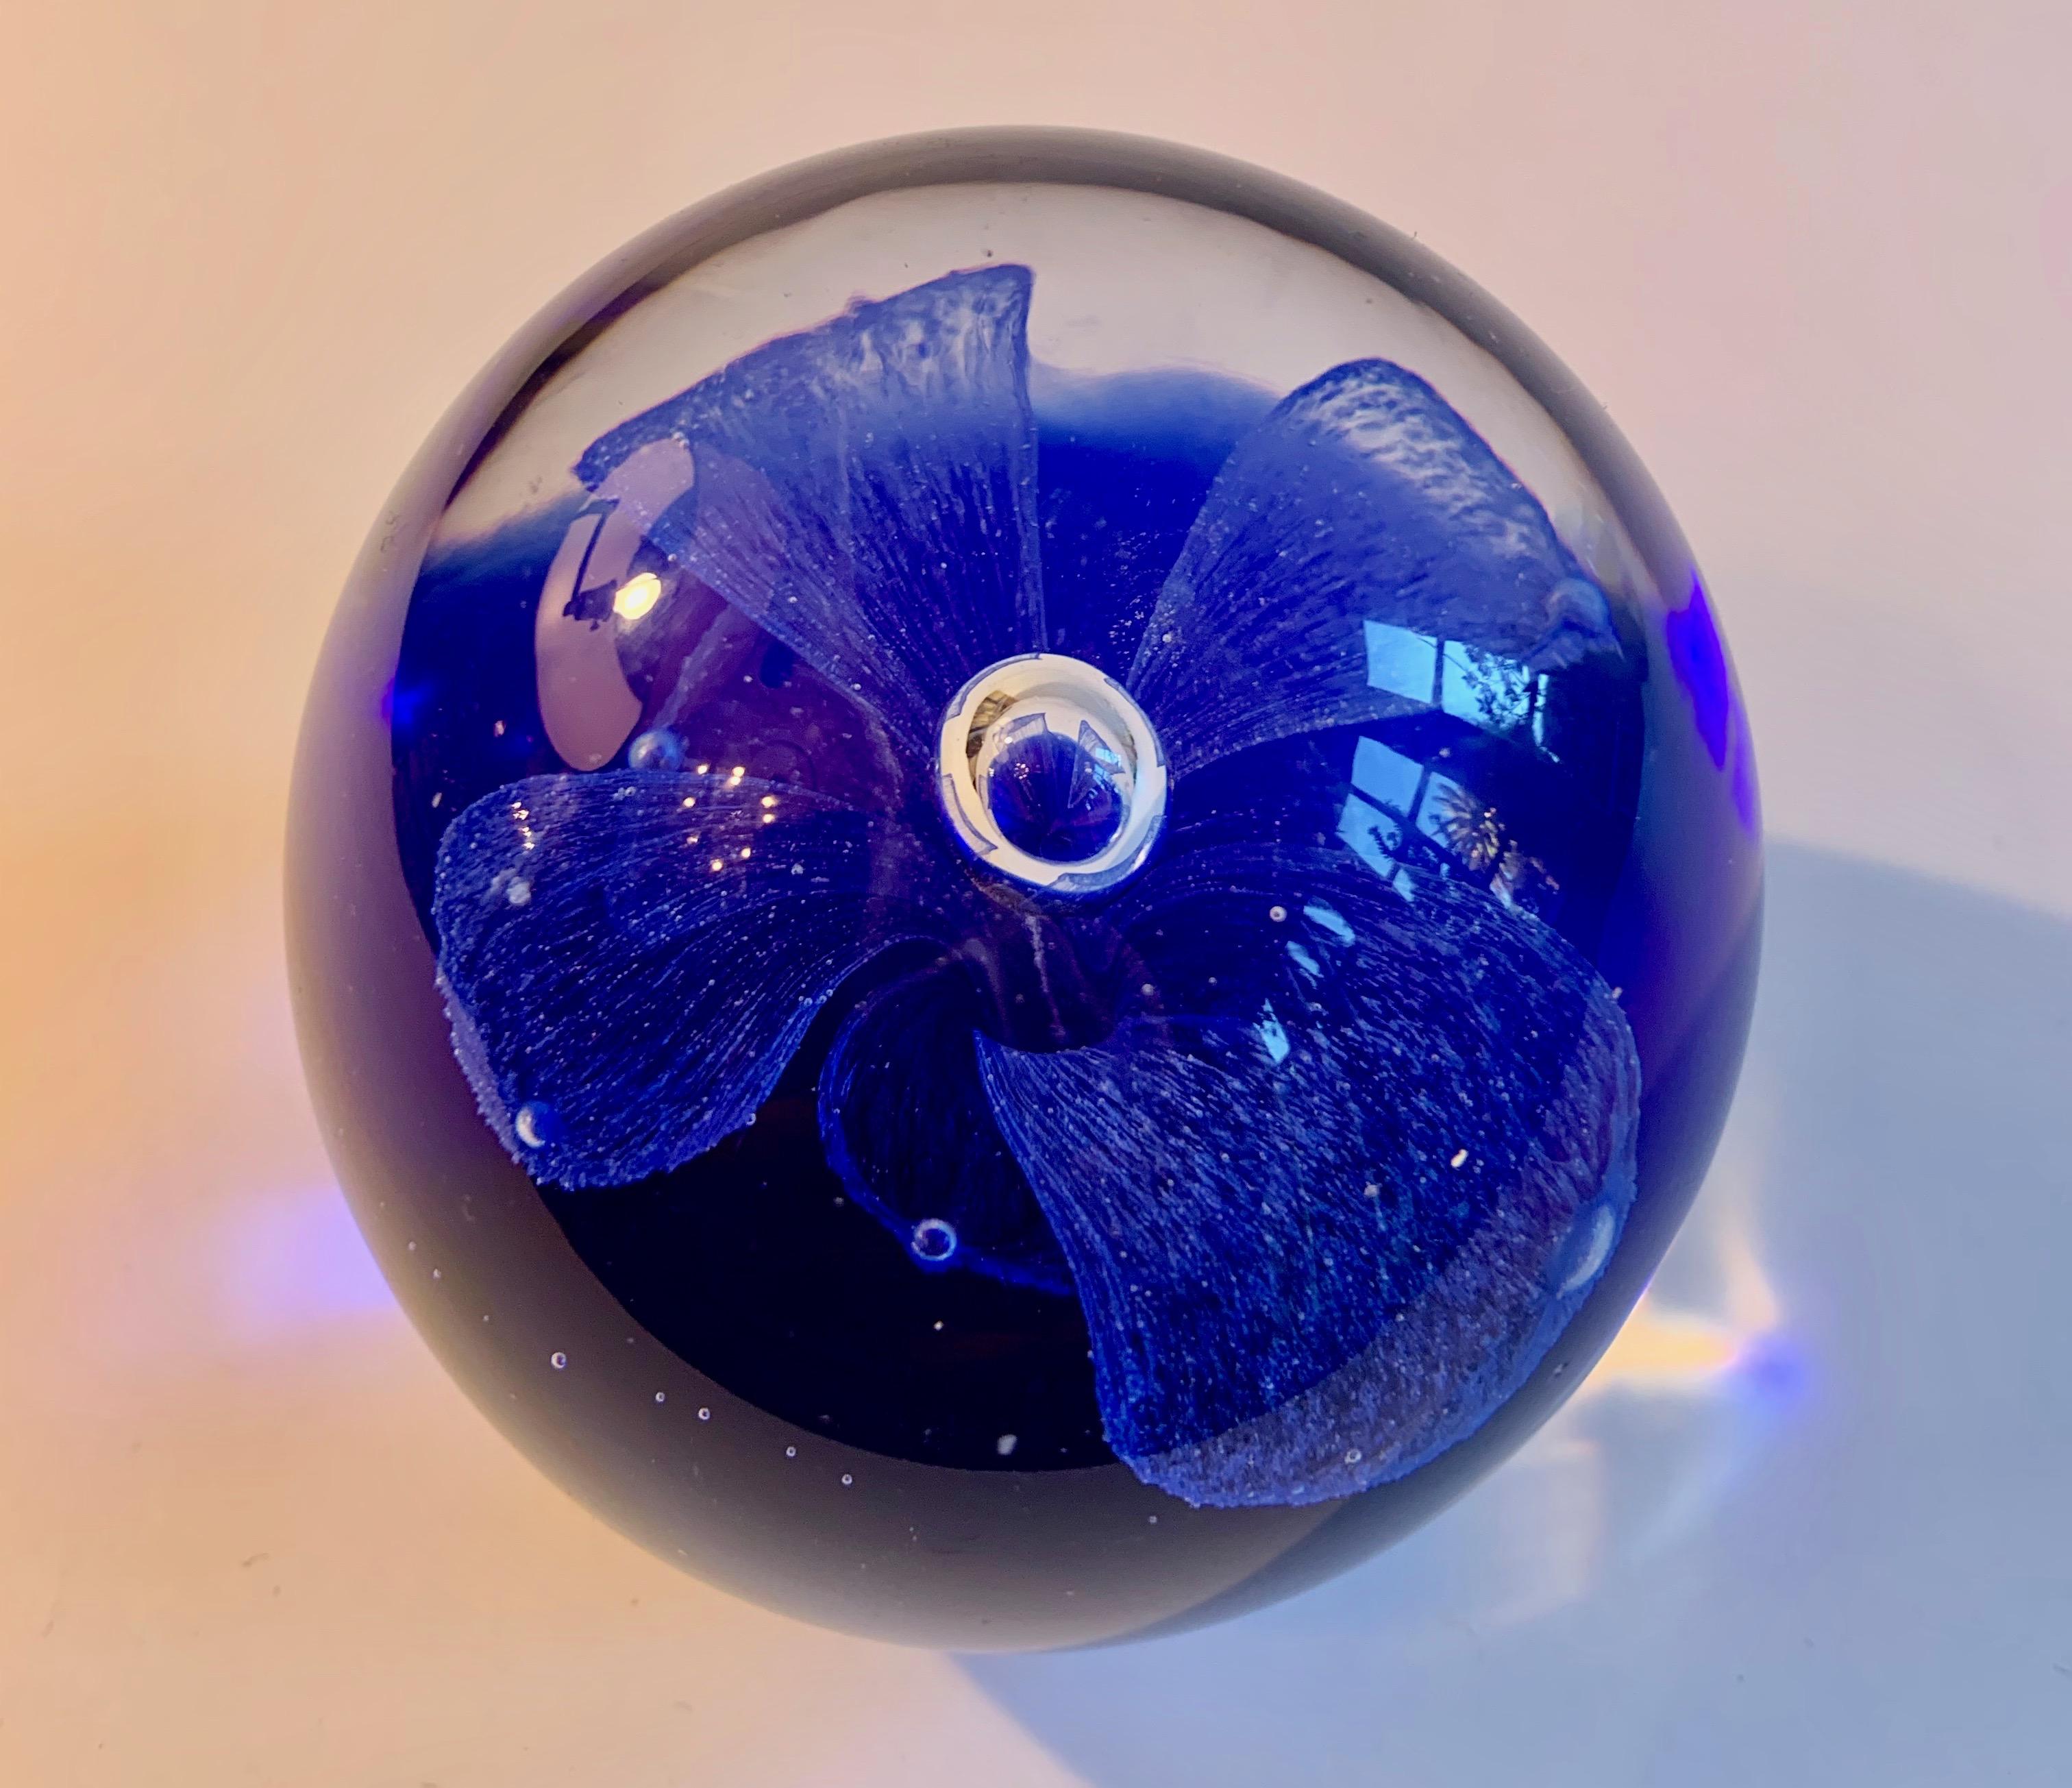 Blue Murano flower paperweight - a lovely sphere with a blue blown flower on a blue field. A wonderful decorative piece. At 2.5